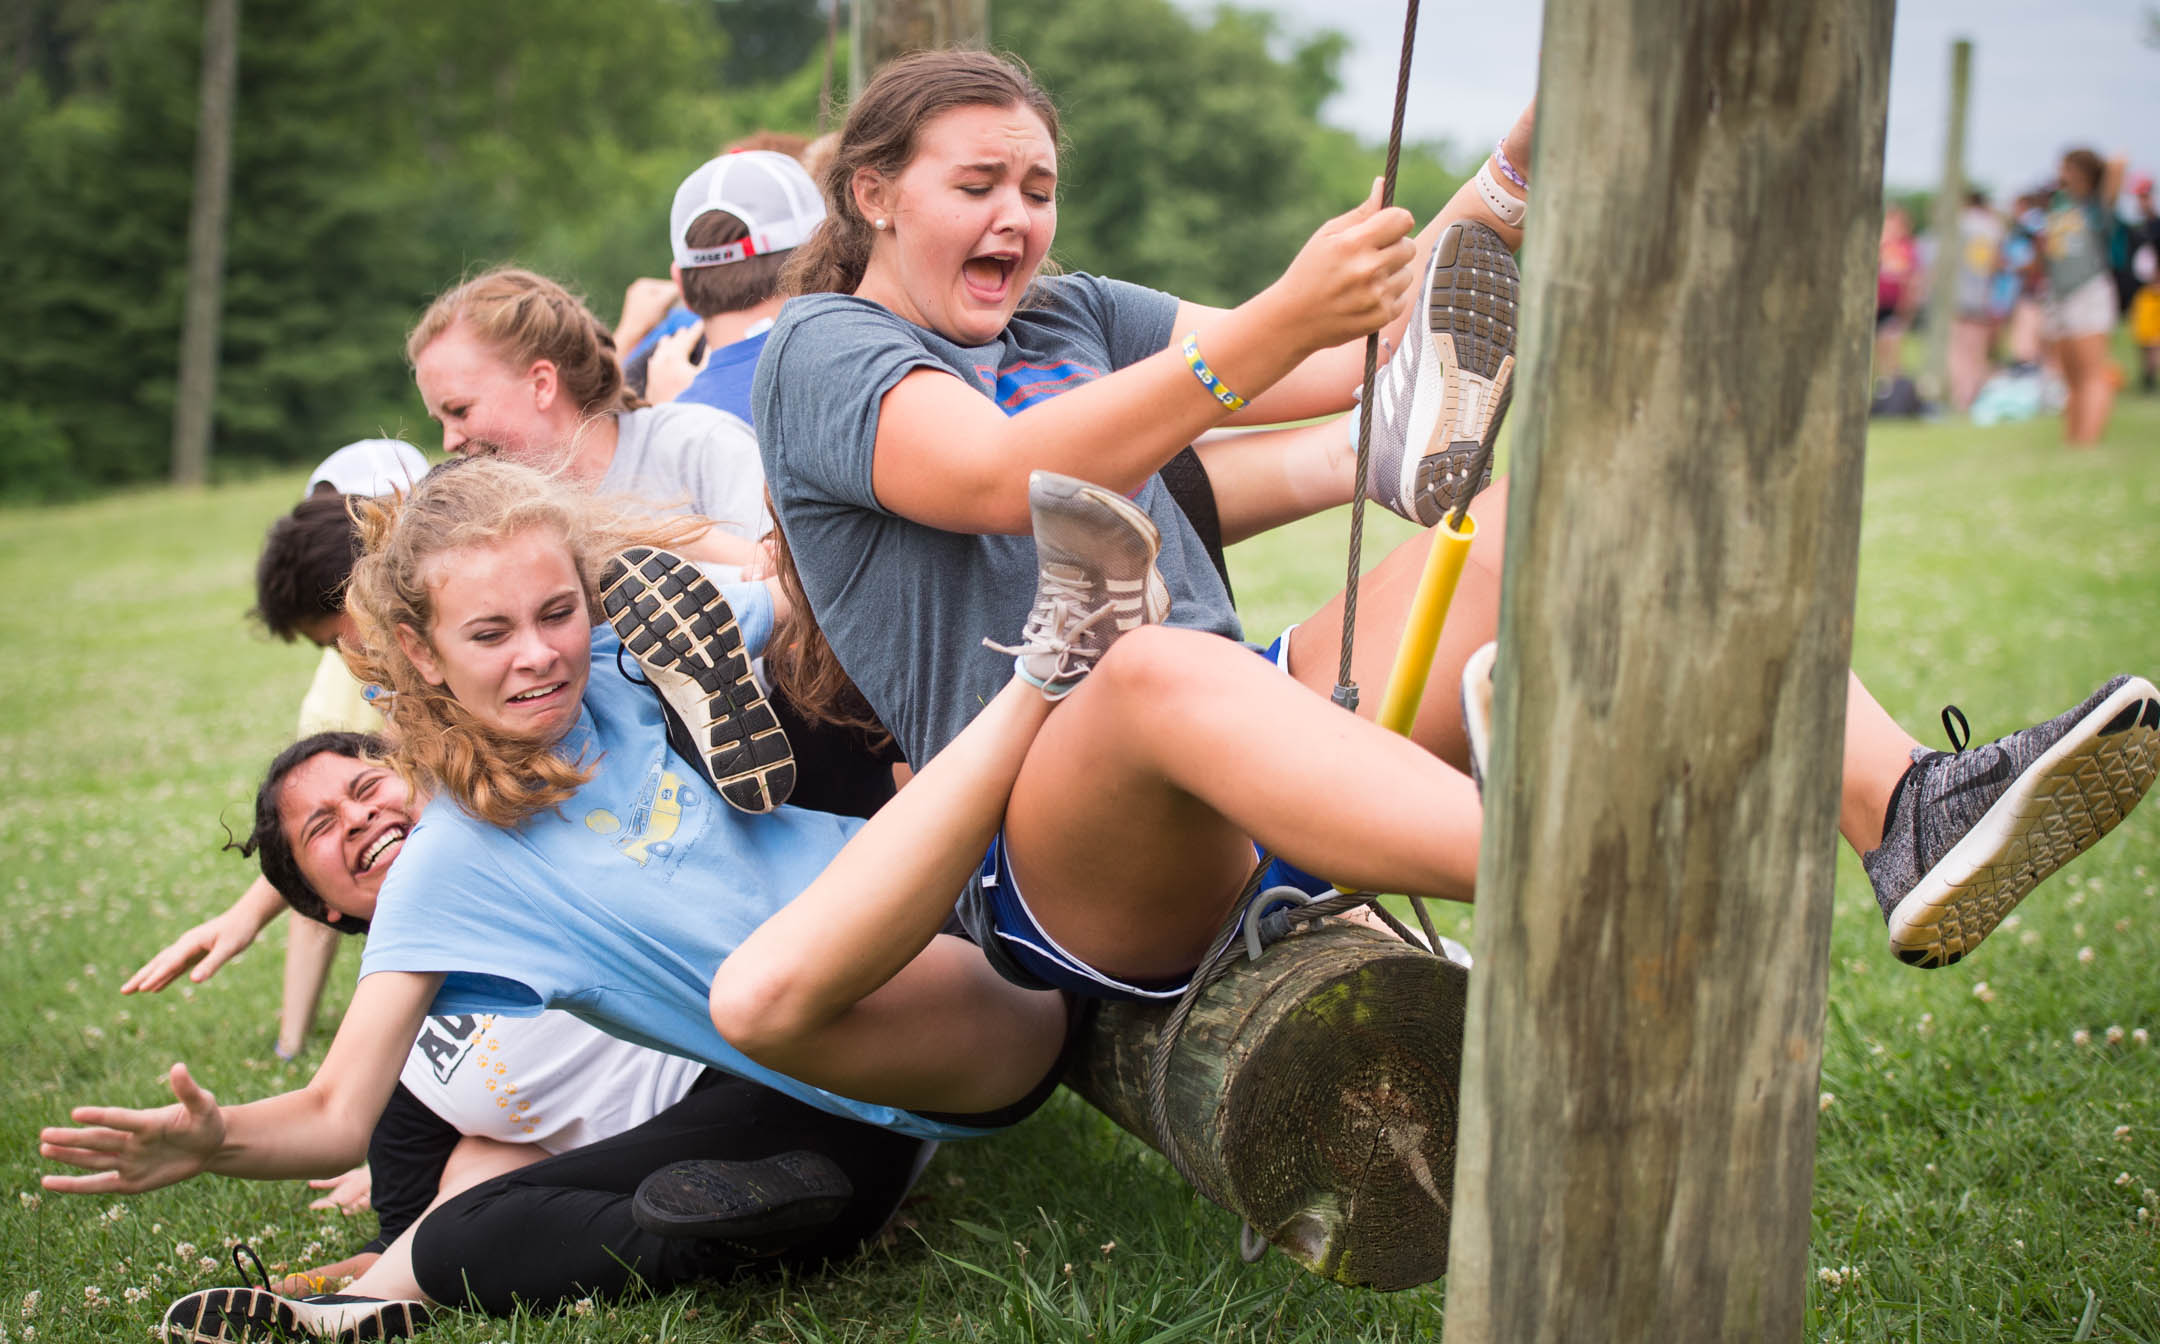 Abbi Jones and her teammates fall off of a suspended log during a team building exercise. Photo by Bobby Ellis, June 12, 2018